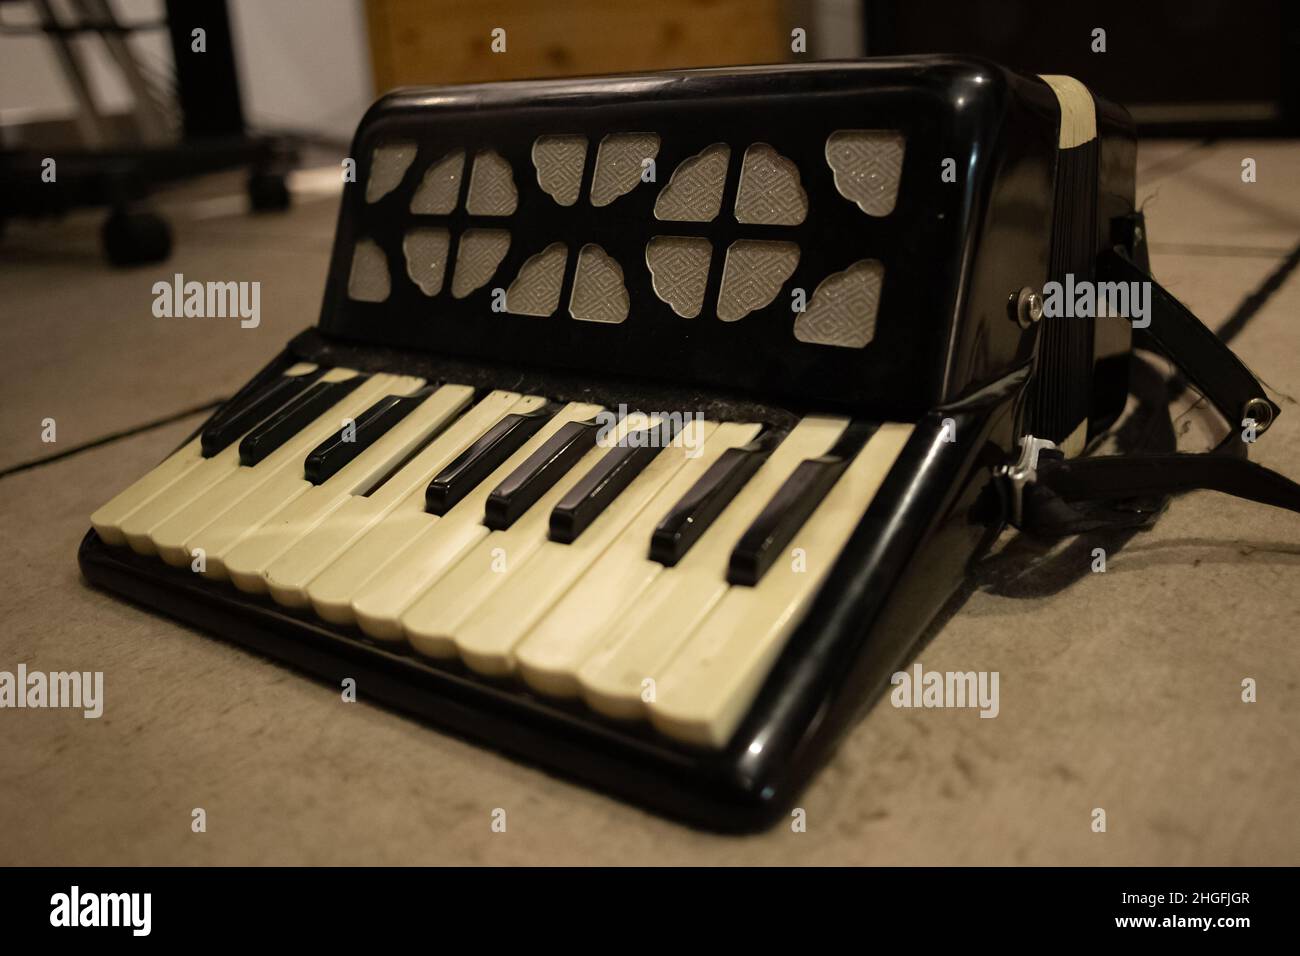 Small miniature piano on the floor of a music recording studio Stock Photo